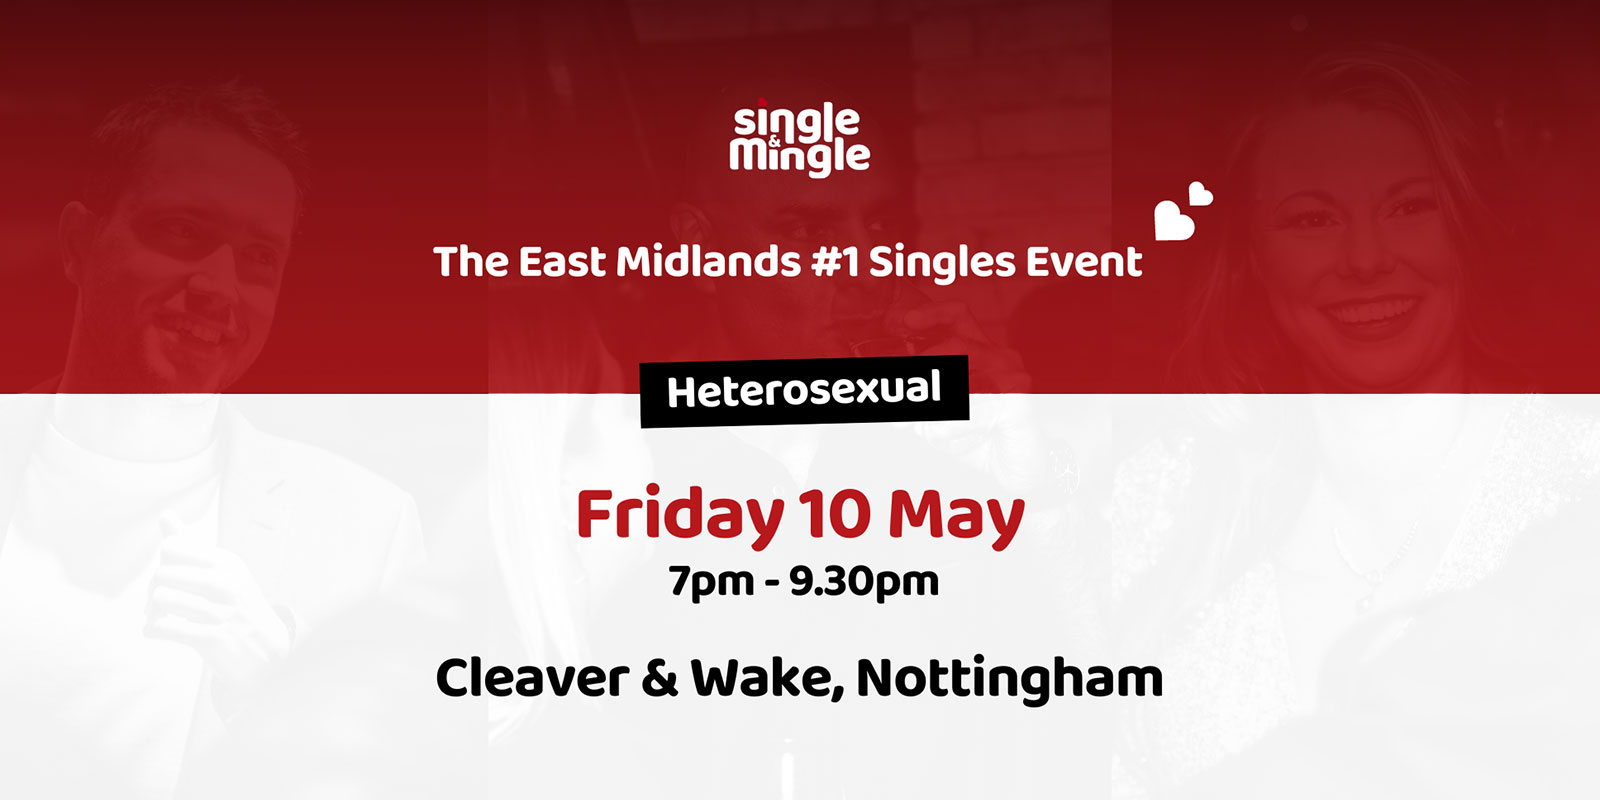 Singles Night Upstairs at Cleaver & Wake, Nottingham. Friday 10 May, 7pm until 9.30pm